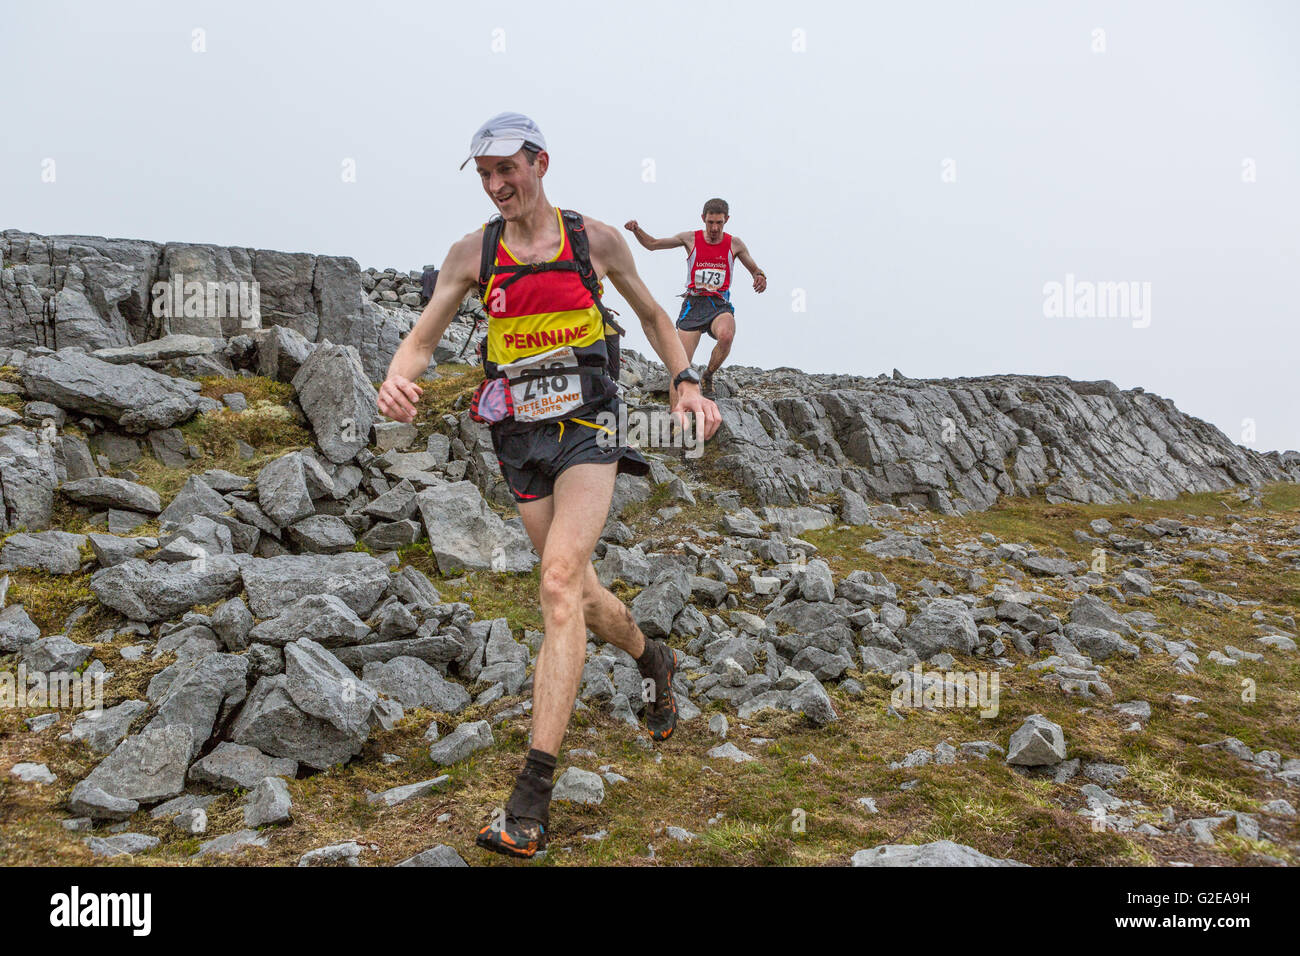 Jura, UK. 28th May, 2016. The Jura Fell Race is one of the toughest British Hill Race challenges with a 28km course taking in 7 mountain summits and a total rise of 2370m. Taking place on the Scottish island of Jura and sponsored by the Isle of Jura Distillery, over 250 runners took part in the event with the winner Finlay Wild completing the course in 3 hours 9 minutes and 53 seconds. The Women’s race was won by Jasmin Paris in 3 hours 40 minutes and 59 seconds.  Pictured: Runners entering the first checkpoint at Dubh Beinn Credit:  Richard Dyson/Alamy Live News Stock Photo